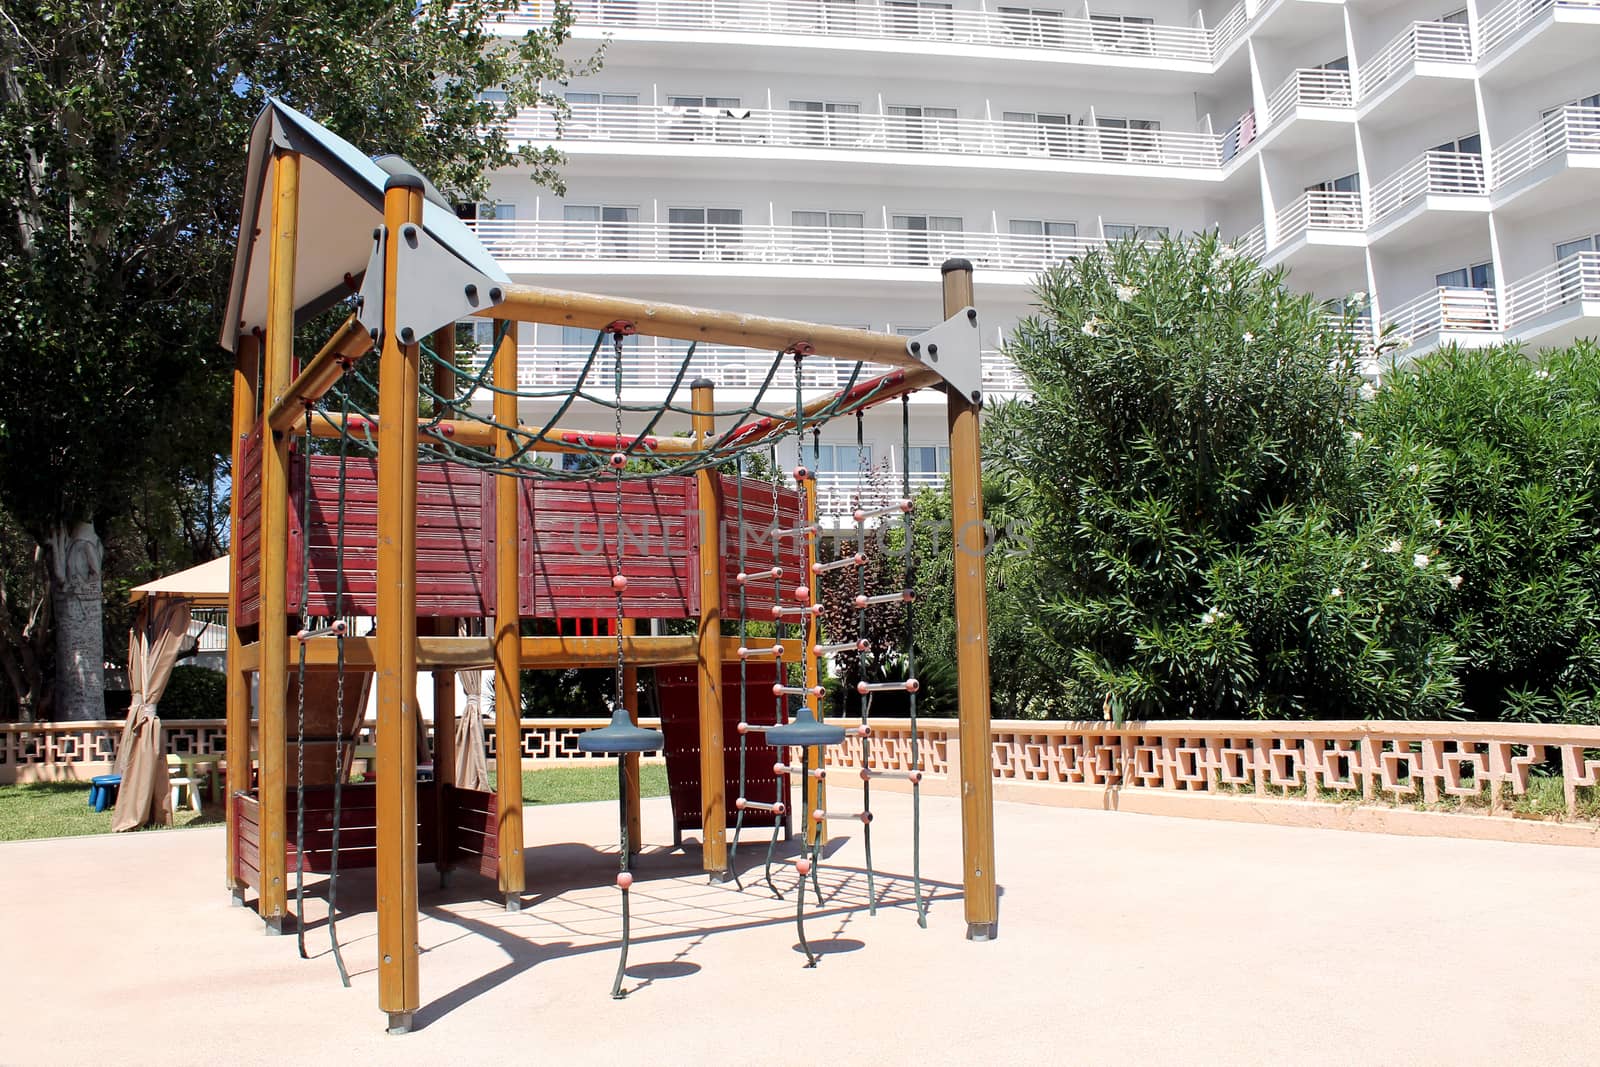 Childrens play park in the grounds of a modern hotel building.